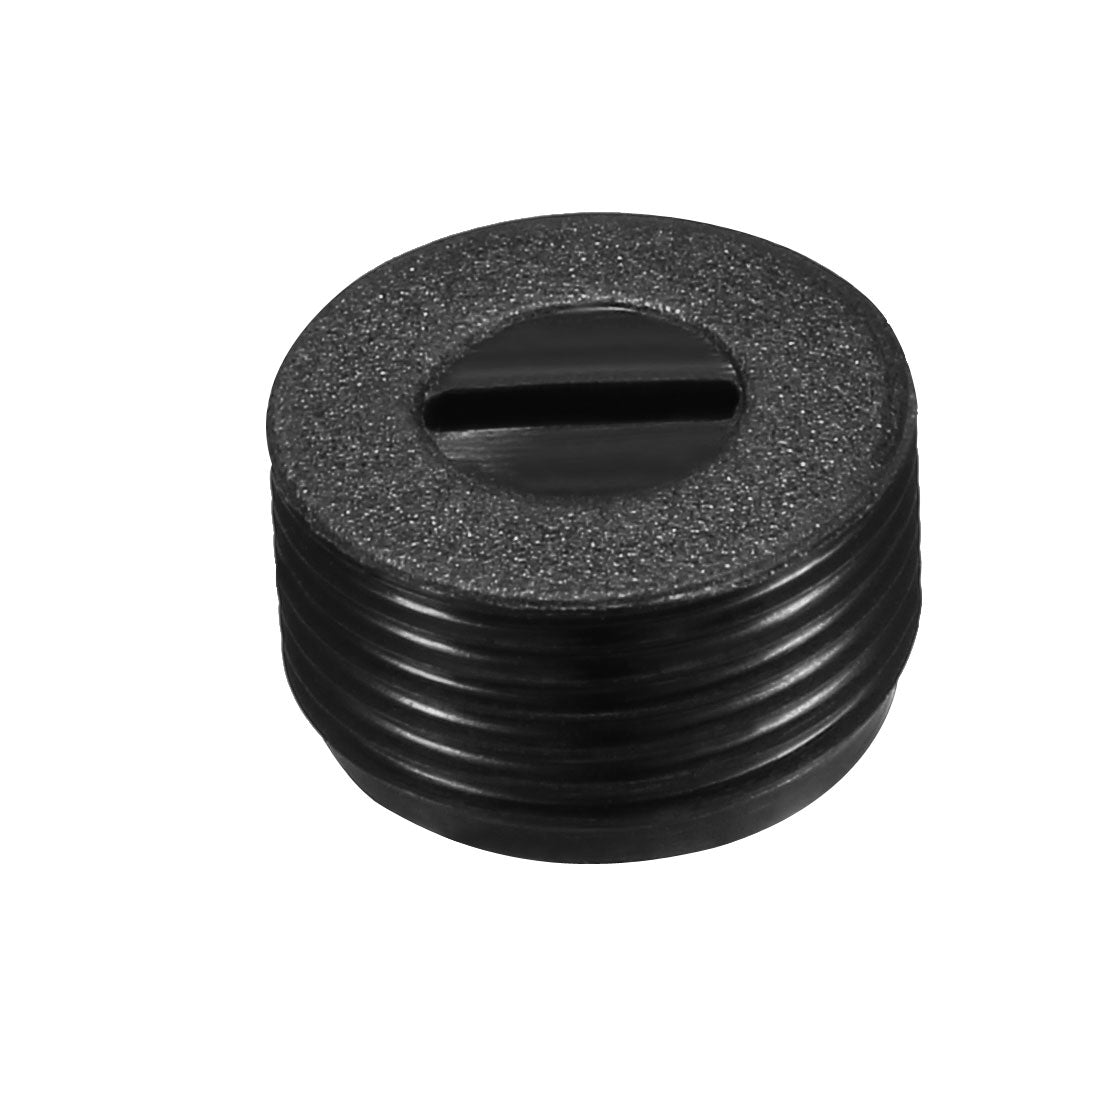 uxcell Uxcell Carbon Brush Holder Caps 15mm O.D. 9mm I.D. 8mm Thickness Motor Brush Cover Plastic Fitting Thread Black 20pcs